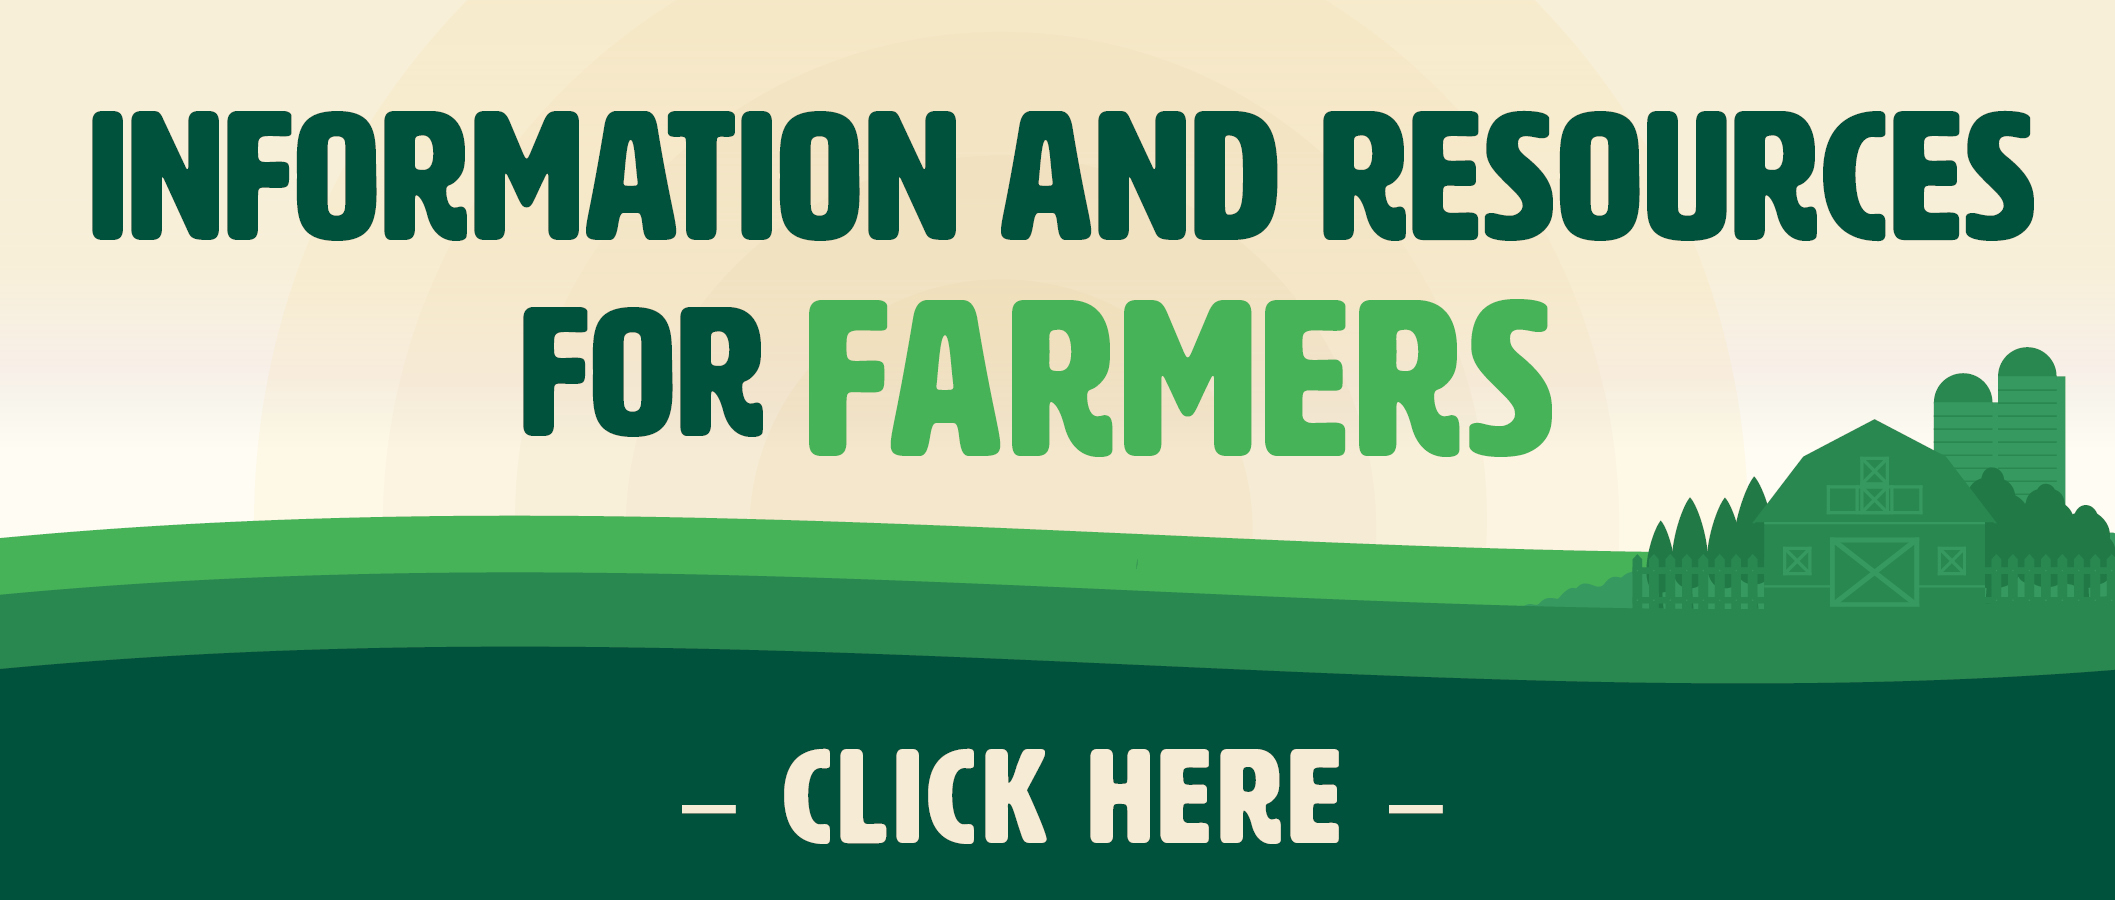 Information and Resources for Farmers